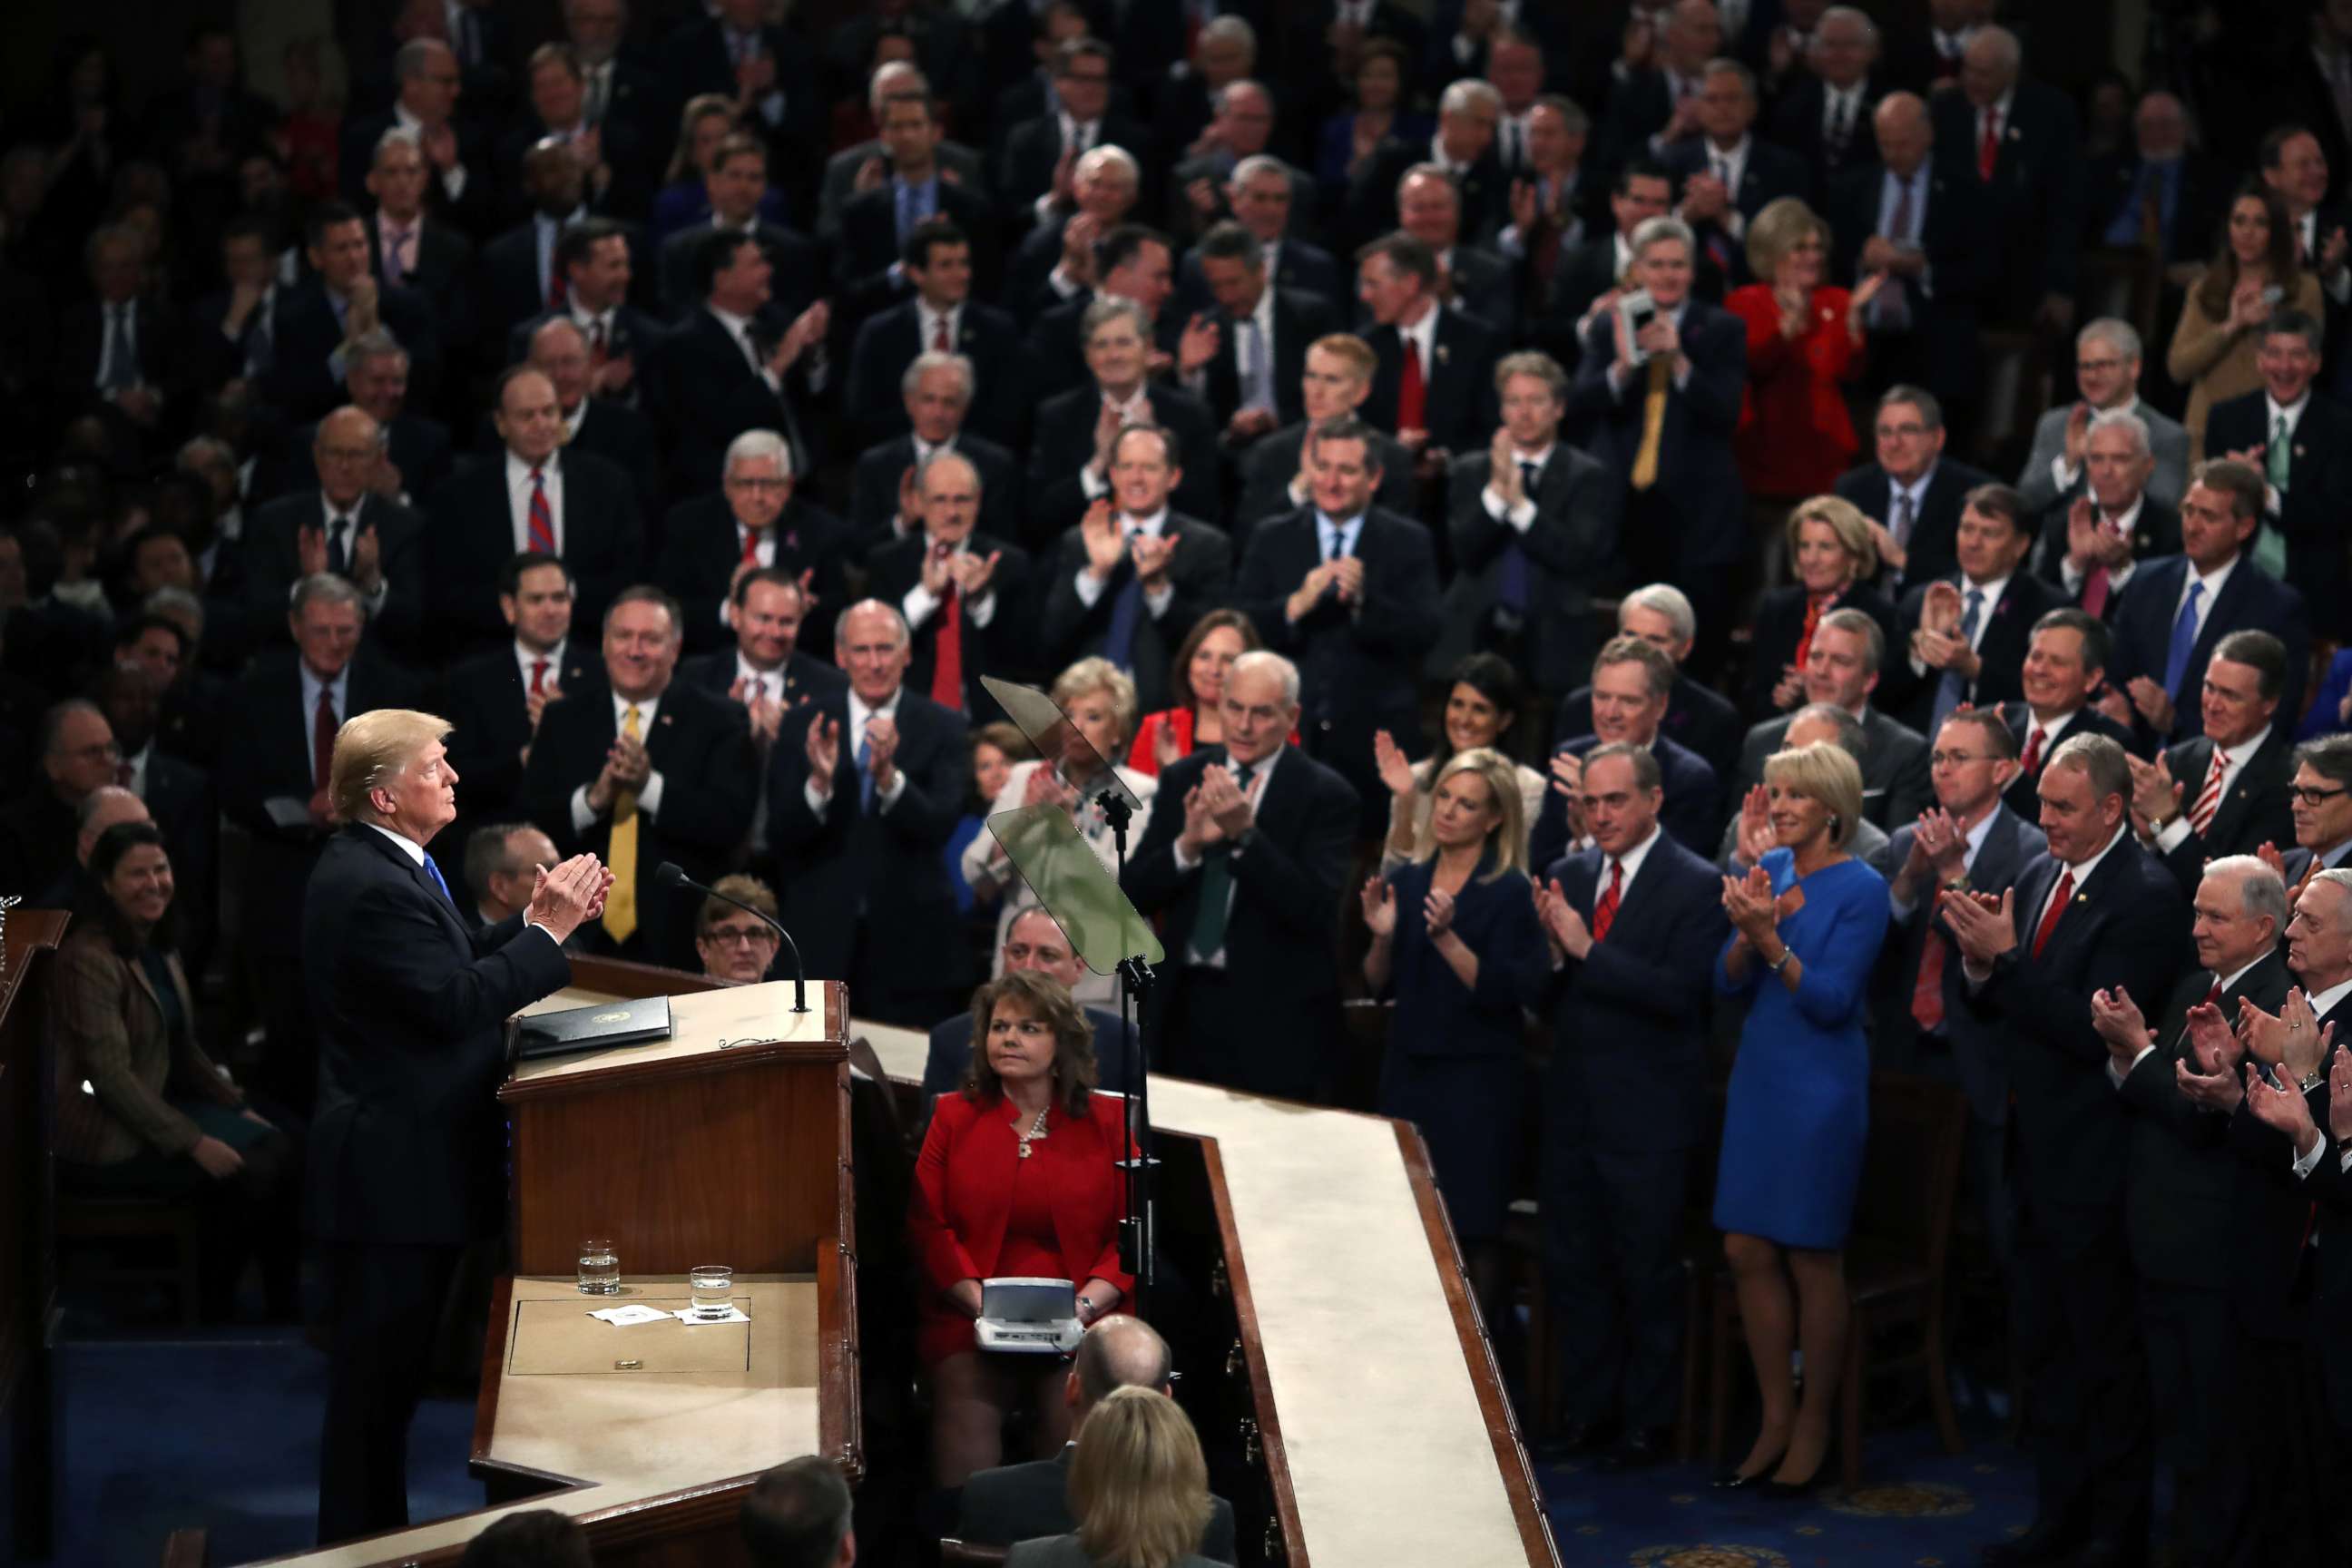 PHOTO: President Donald Trump delivers the State of the Union address in the chamber of the U.S. House of Representatives Jan. 30, 2018, in Washington.